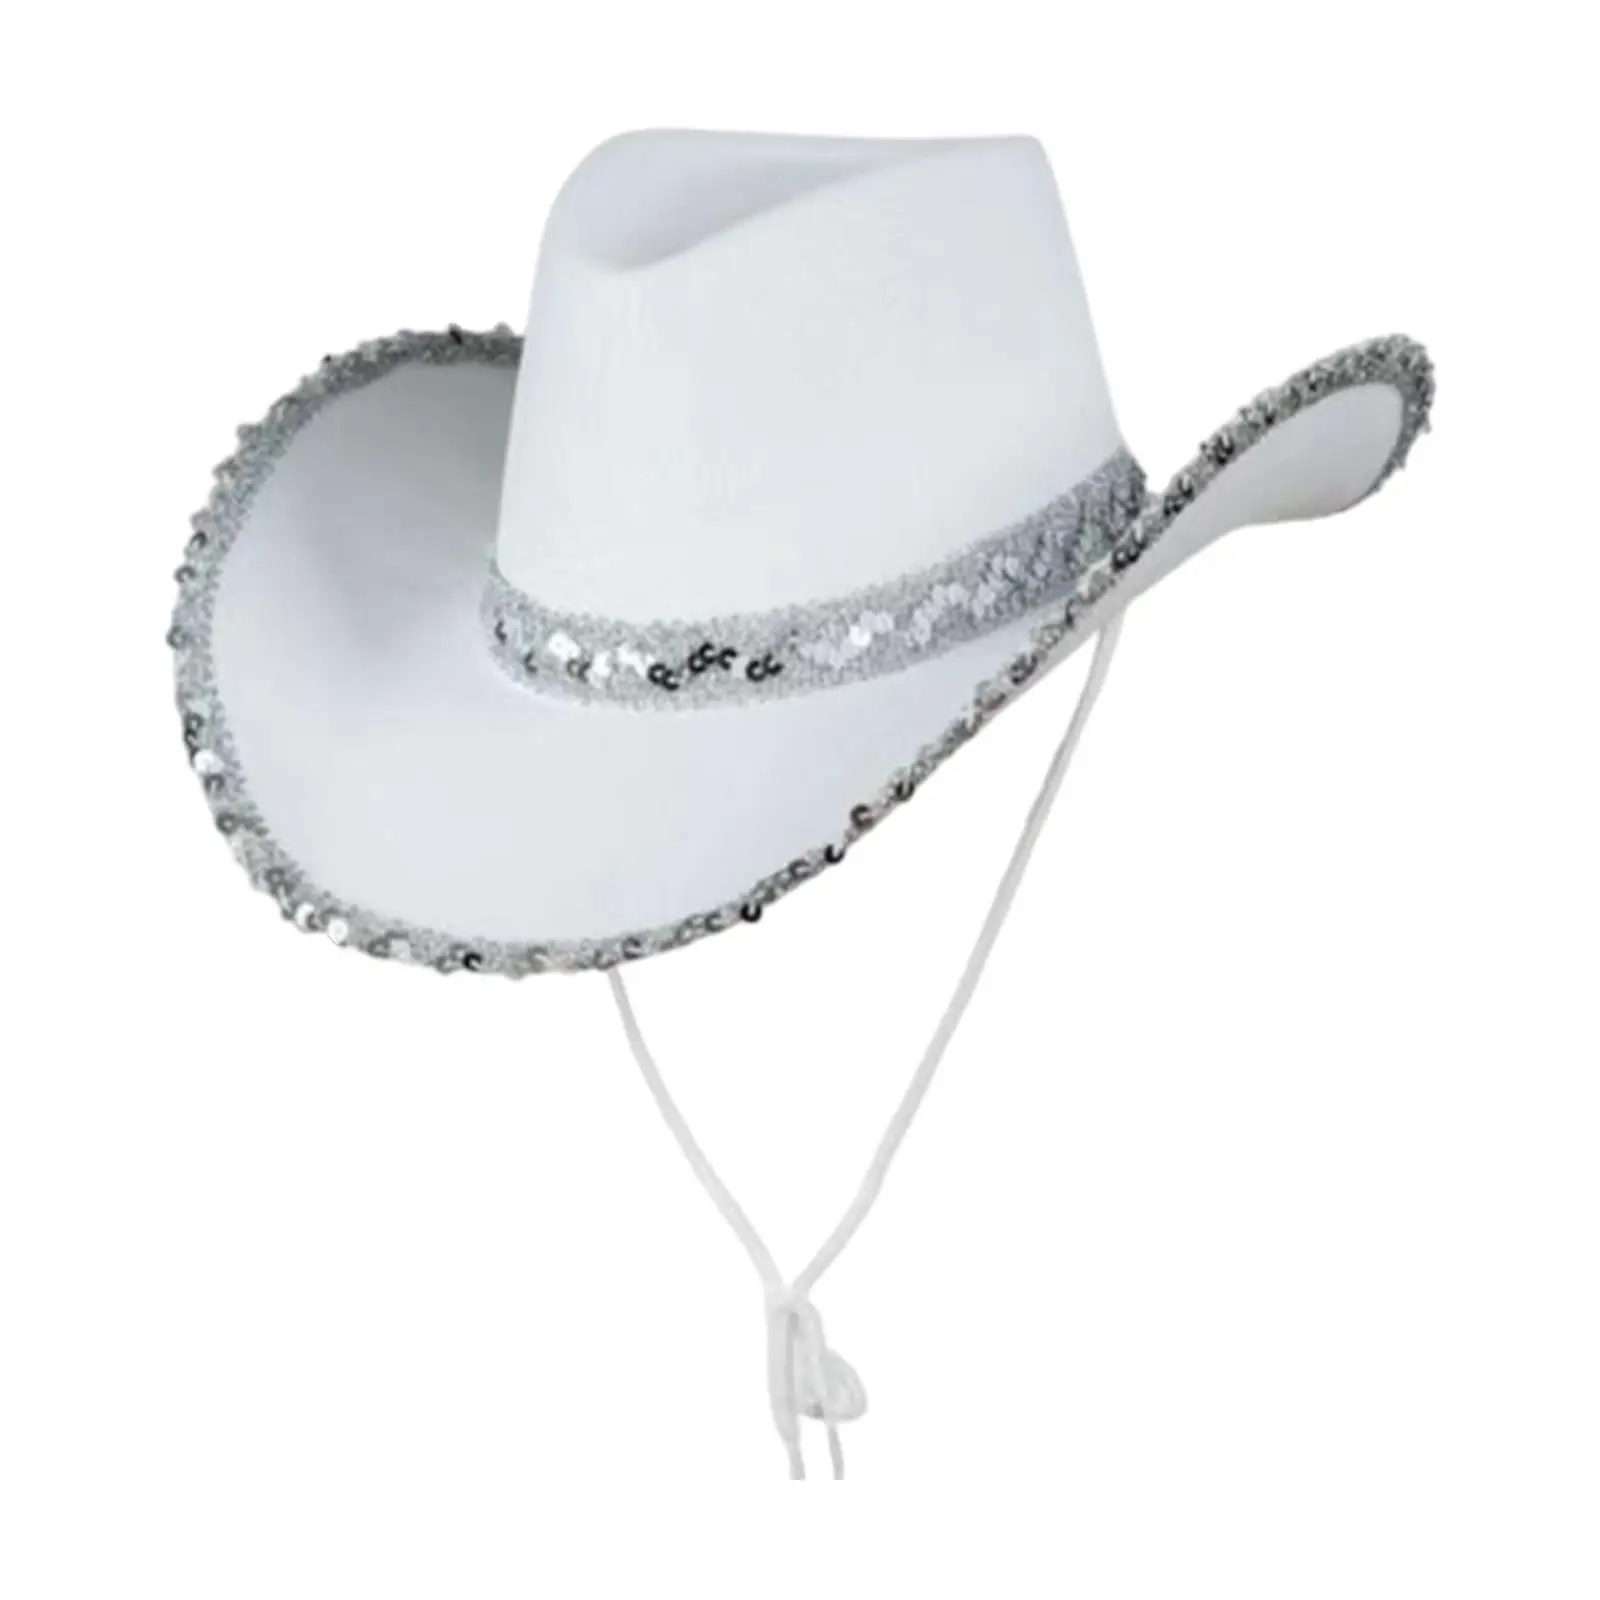 Western Style Women  Hat Party Hat Sunhat Cowgirl Hats for Bridal Music Festival Concerts Role Play Costumes Accessories